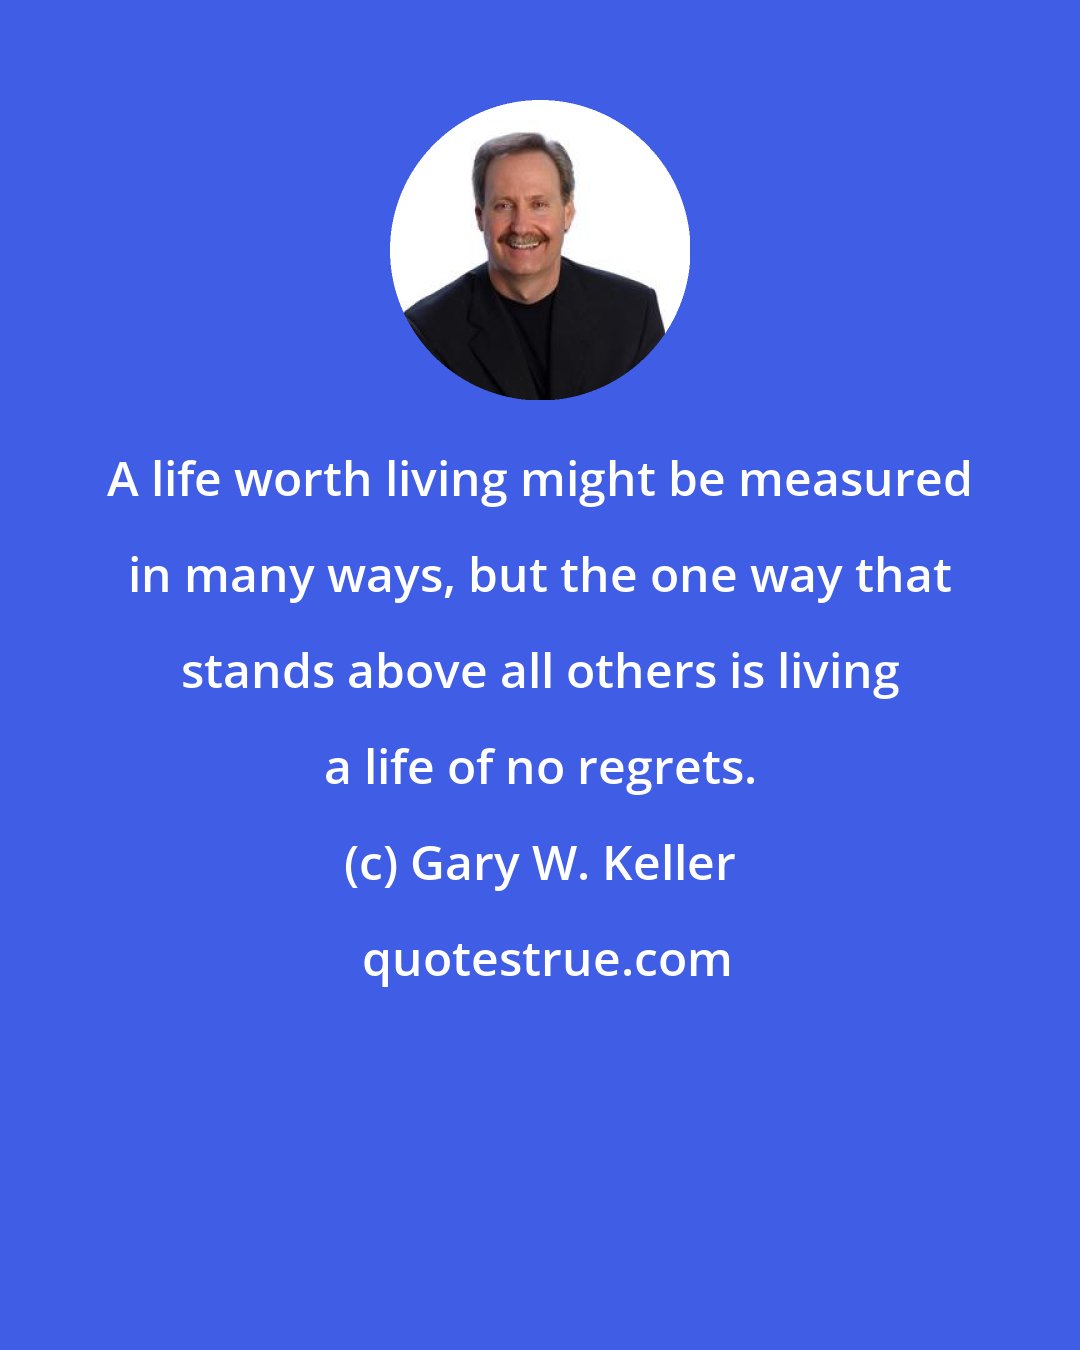 Gary W. Keller: A life worth living might be measured in many ways, but the one way that stands above all others is living a life of no regrets.